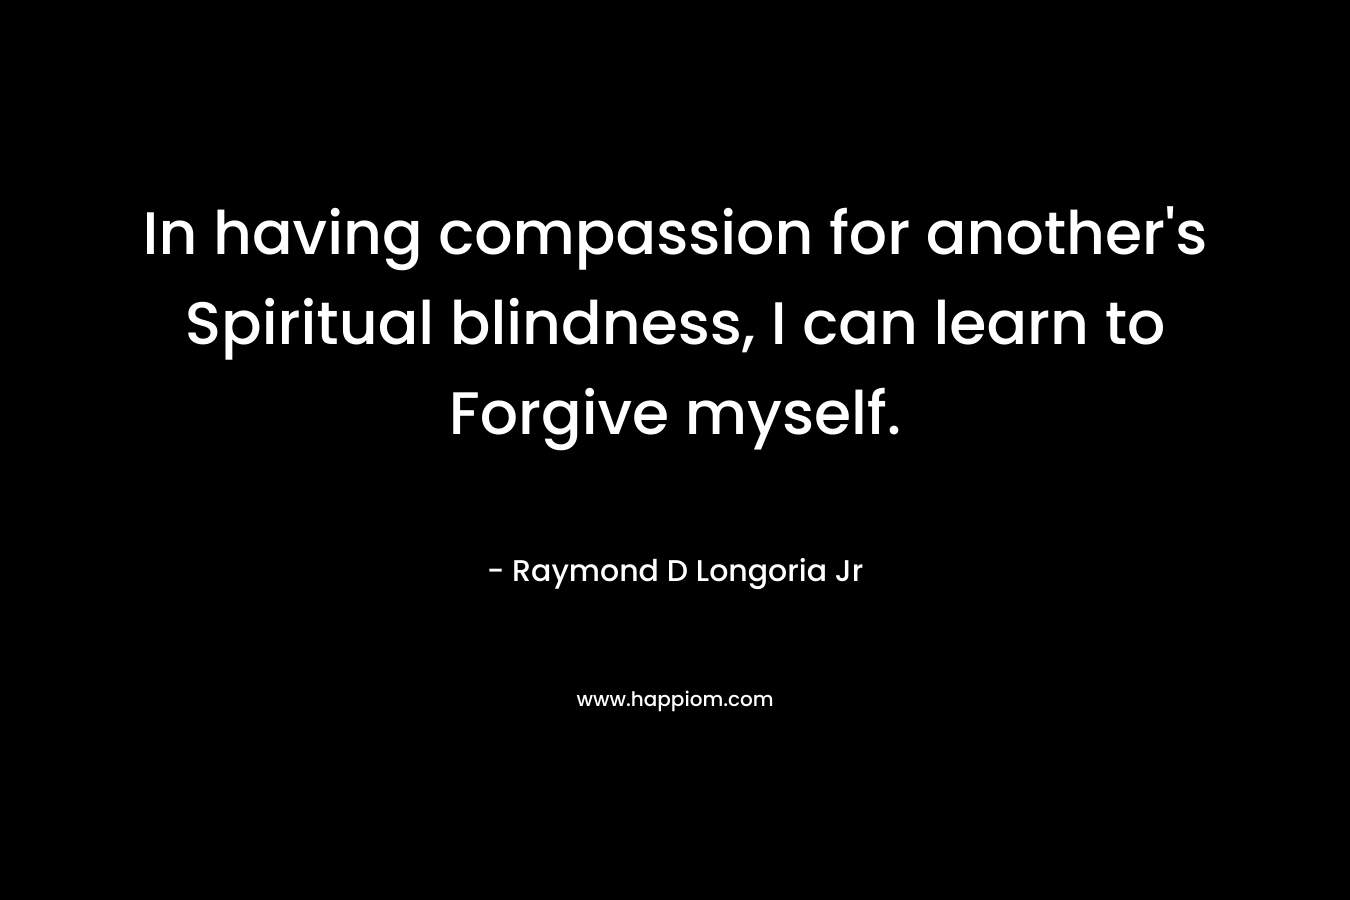 In having compassion for another’s Spiritual blindness, I can learn to Forgive myself. – Raymond D Longoria Jr